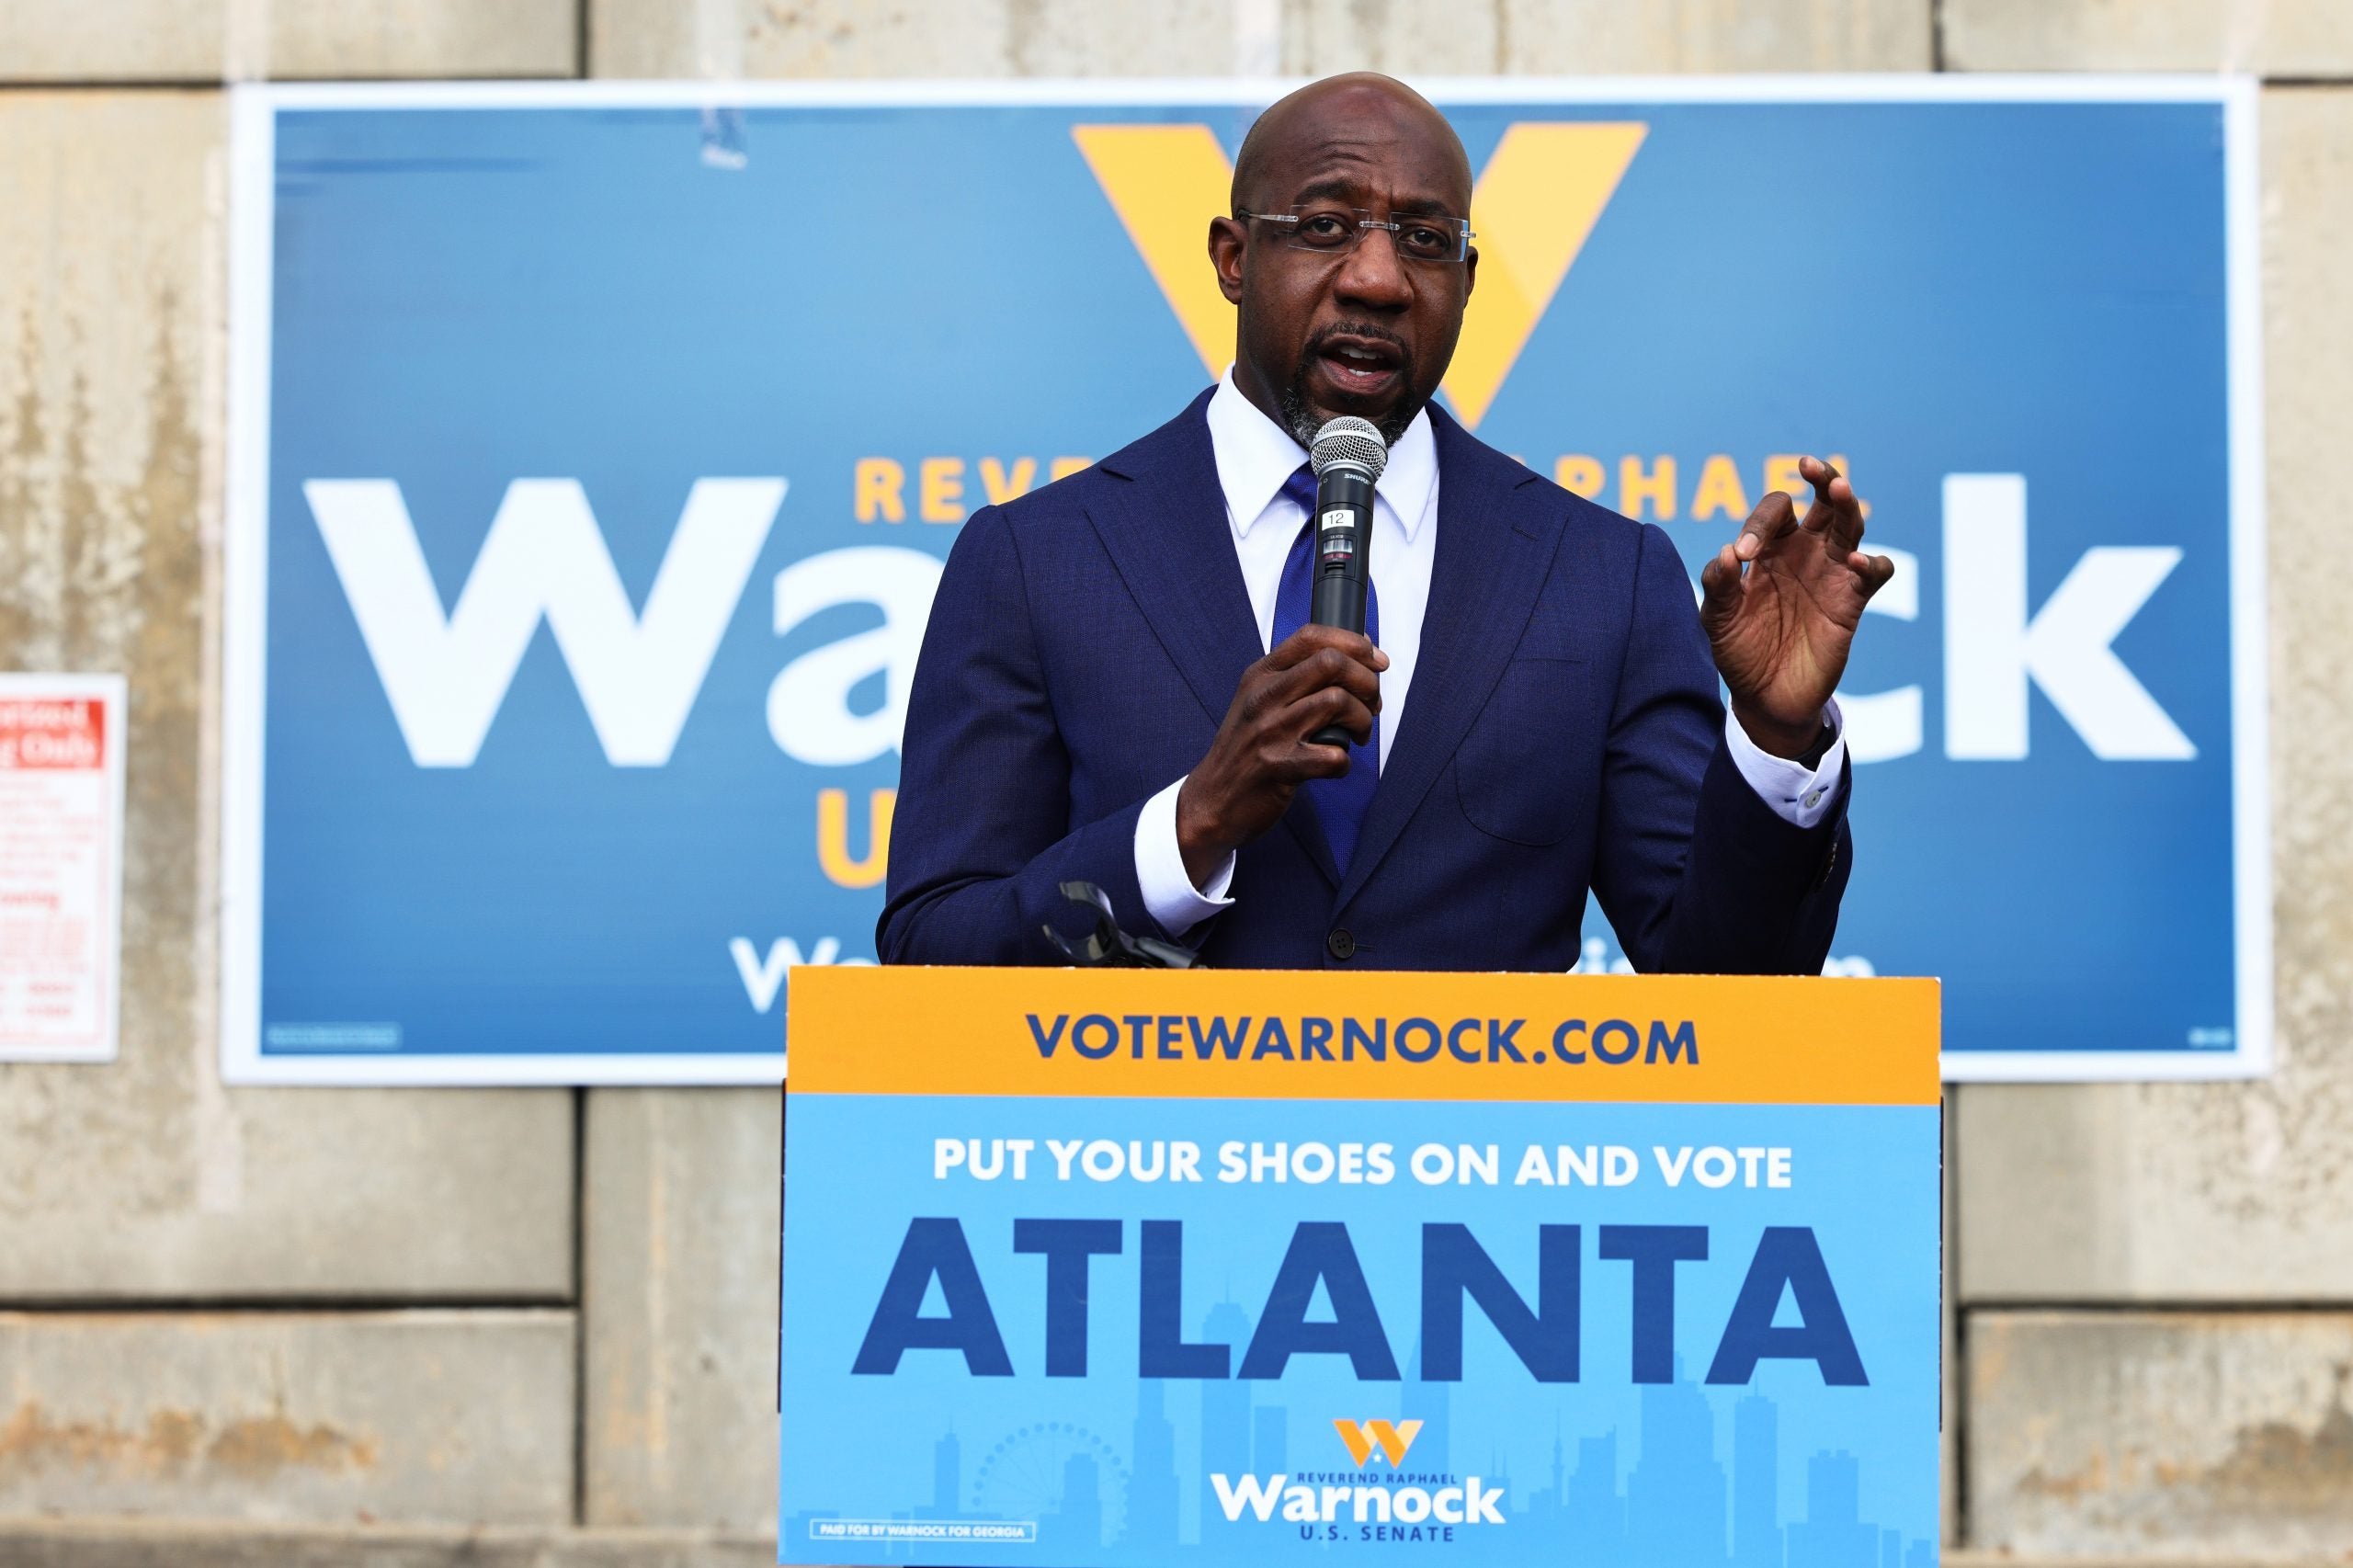 Senator Raphael Warnock Requests More Government Transparency In Response To “Stop Cop City” Protests